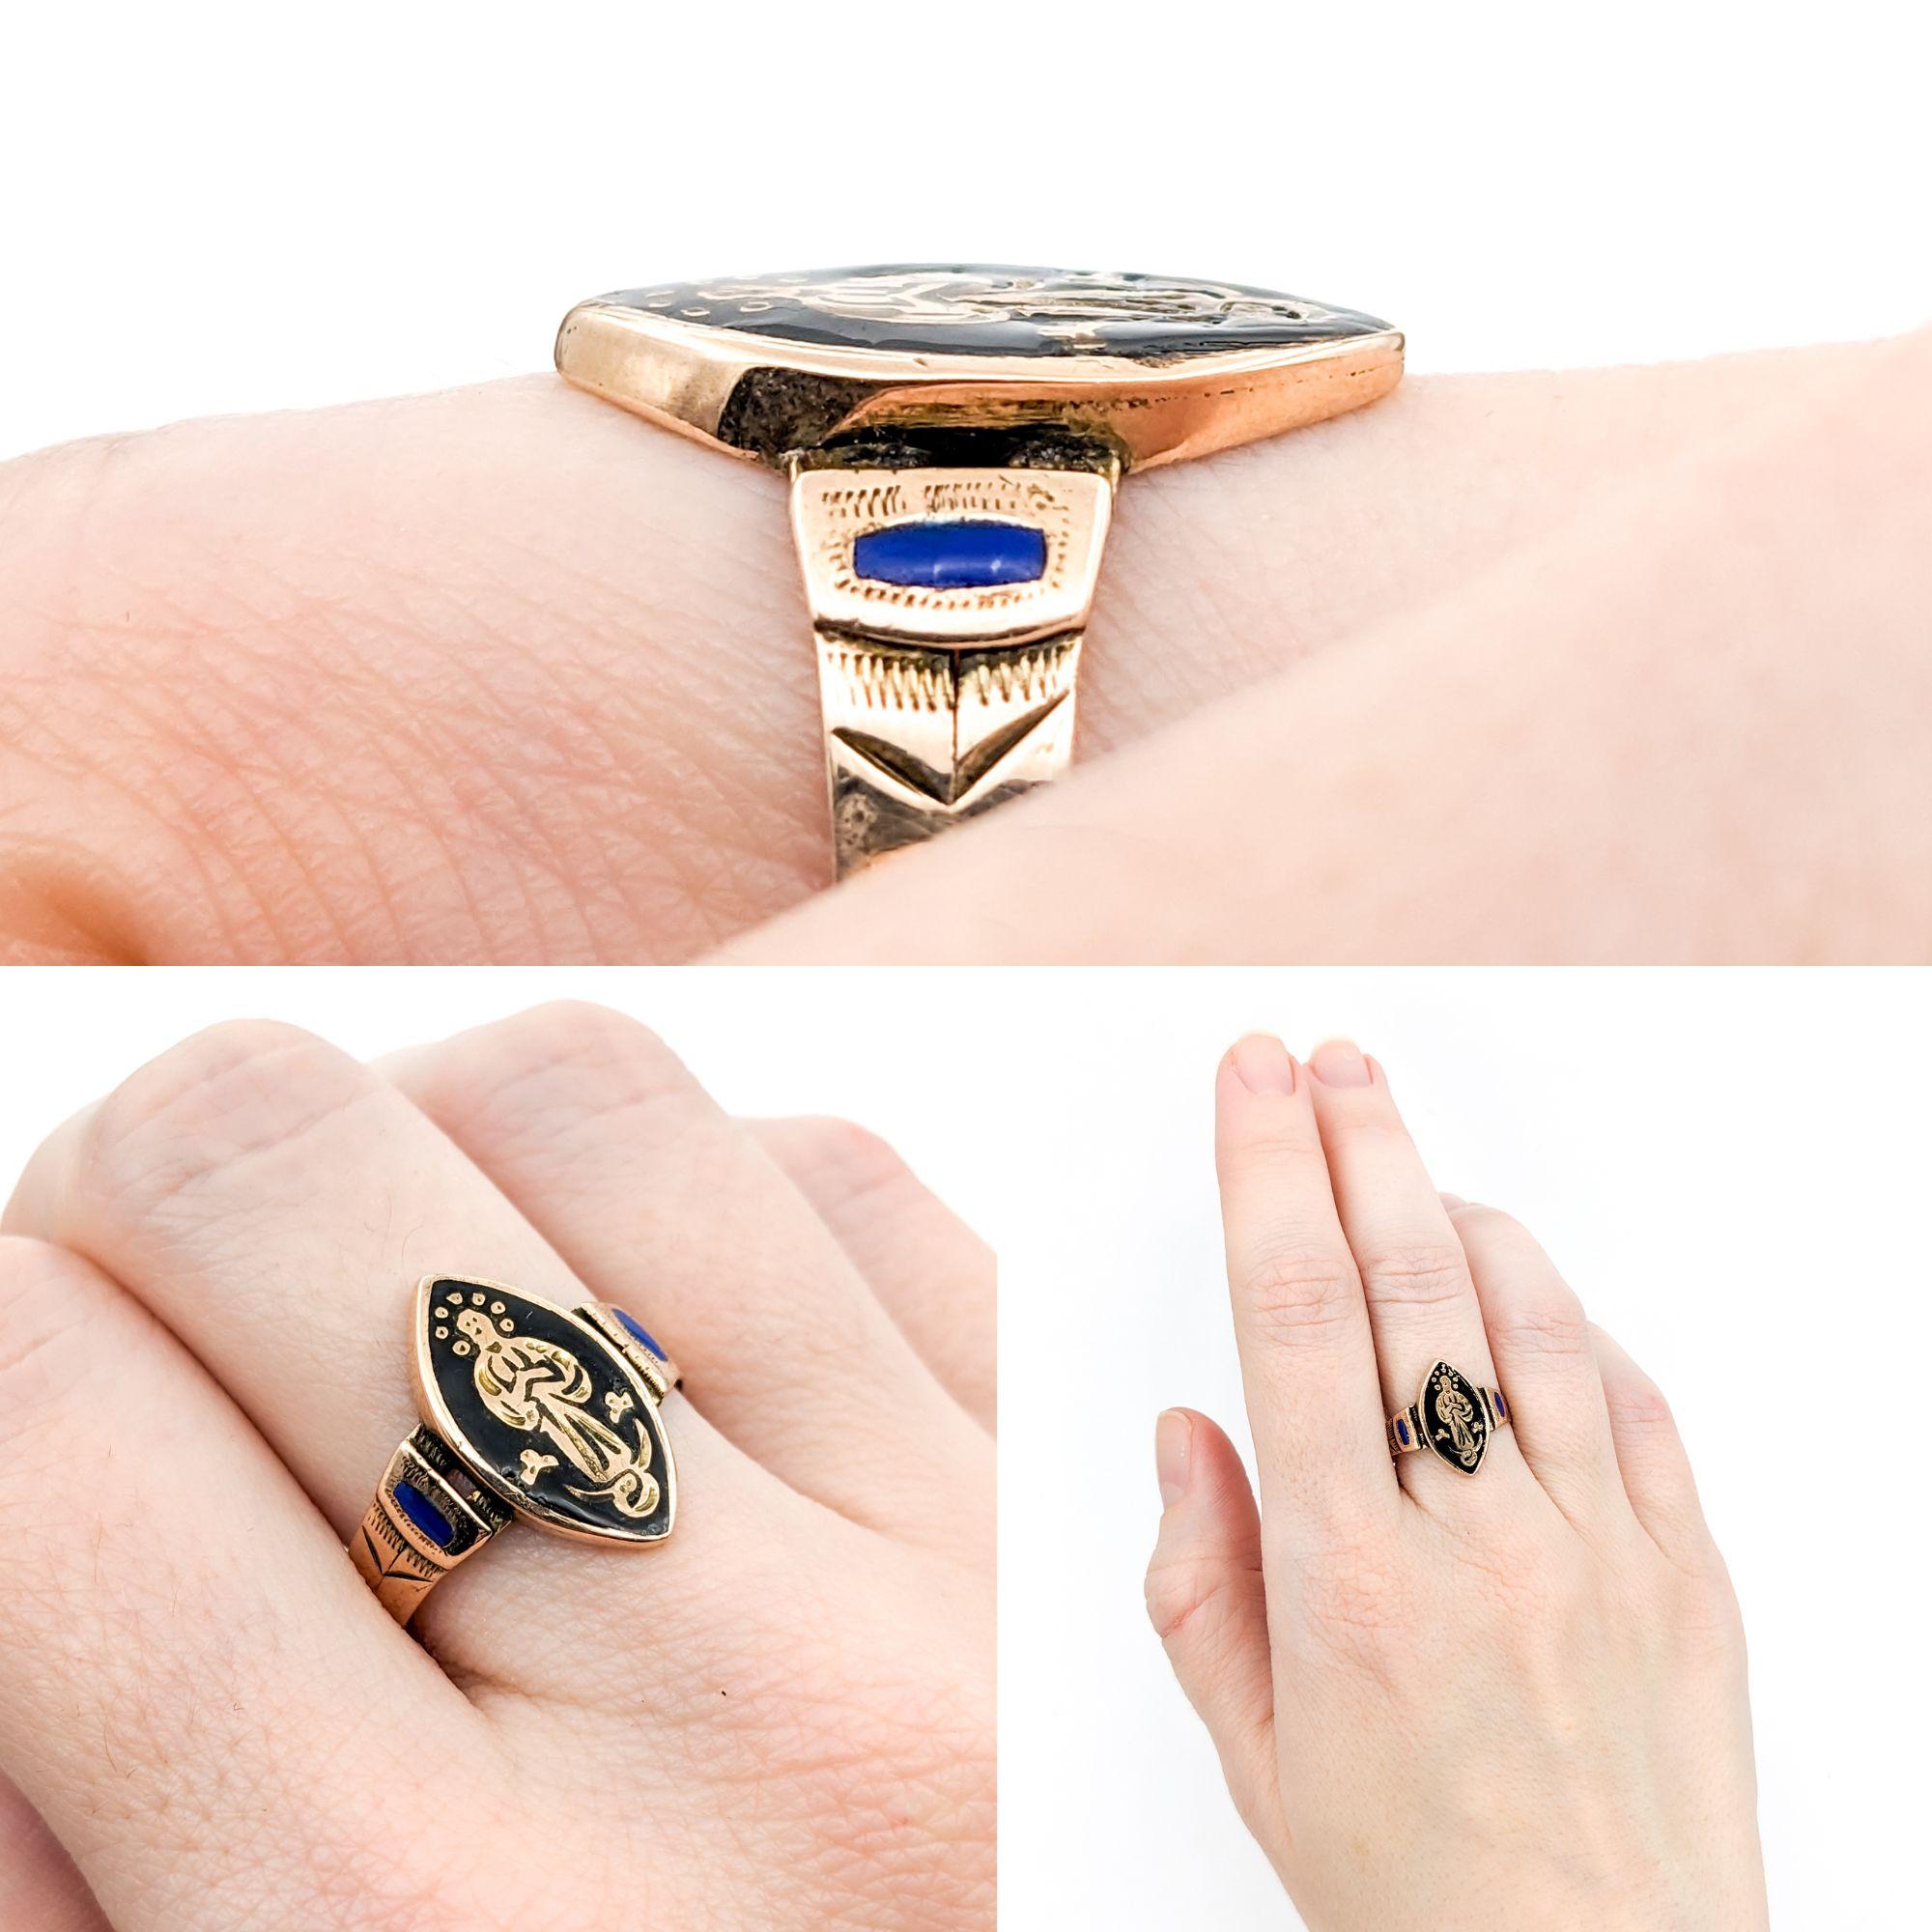 Antique Victorian Black Enamel Religious Saint Ring In Yellow Gold

This exquisite Antique Victorian Ring is beautifully crafted in 10k Yellow Gold. The highlight of this ring is its stunning centerpiece, a navette shaped face featuring a religious